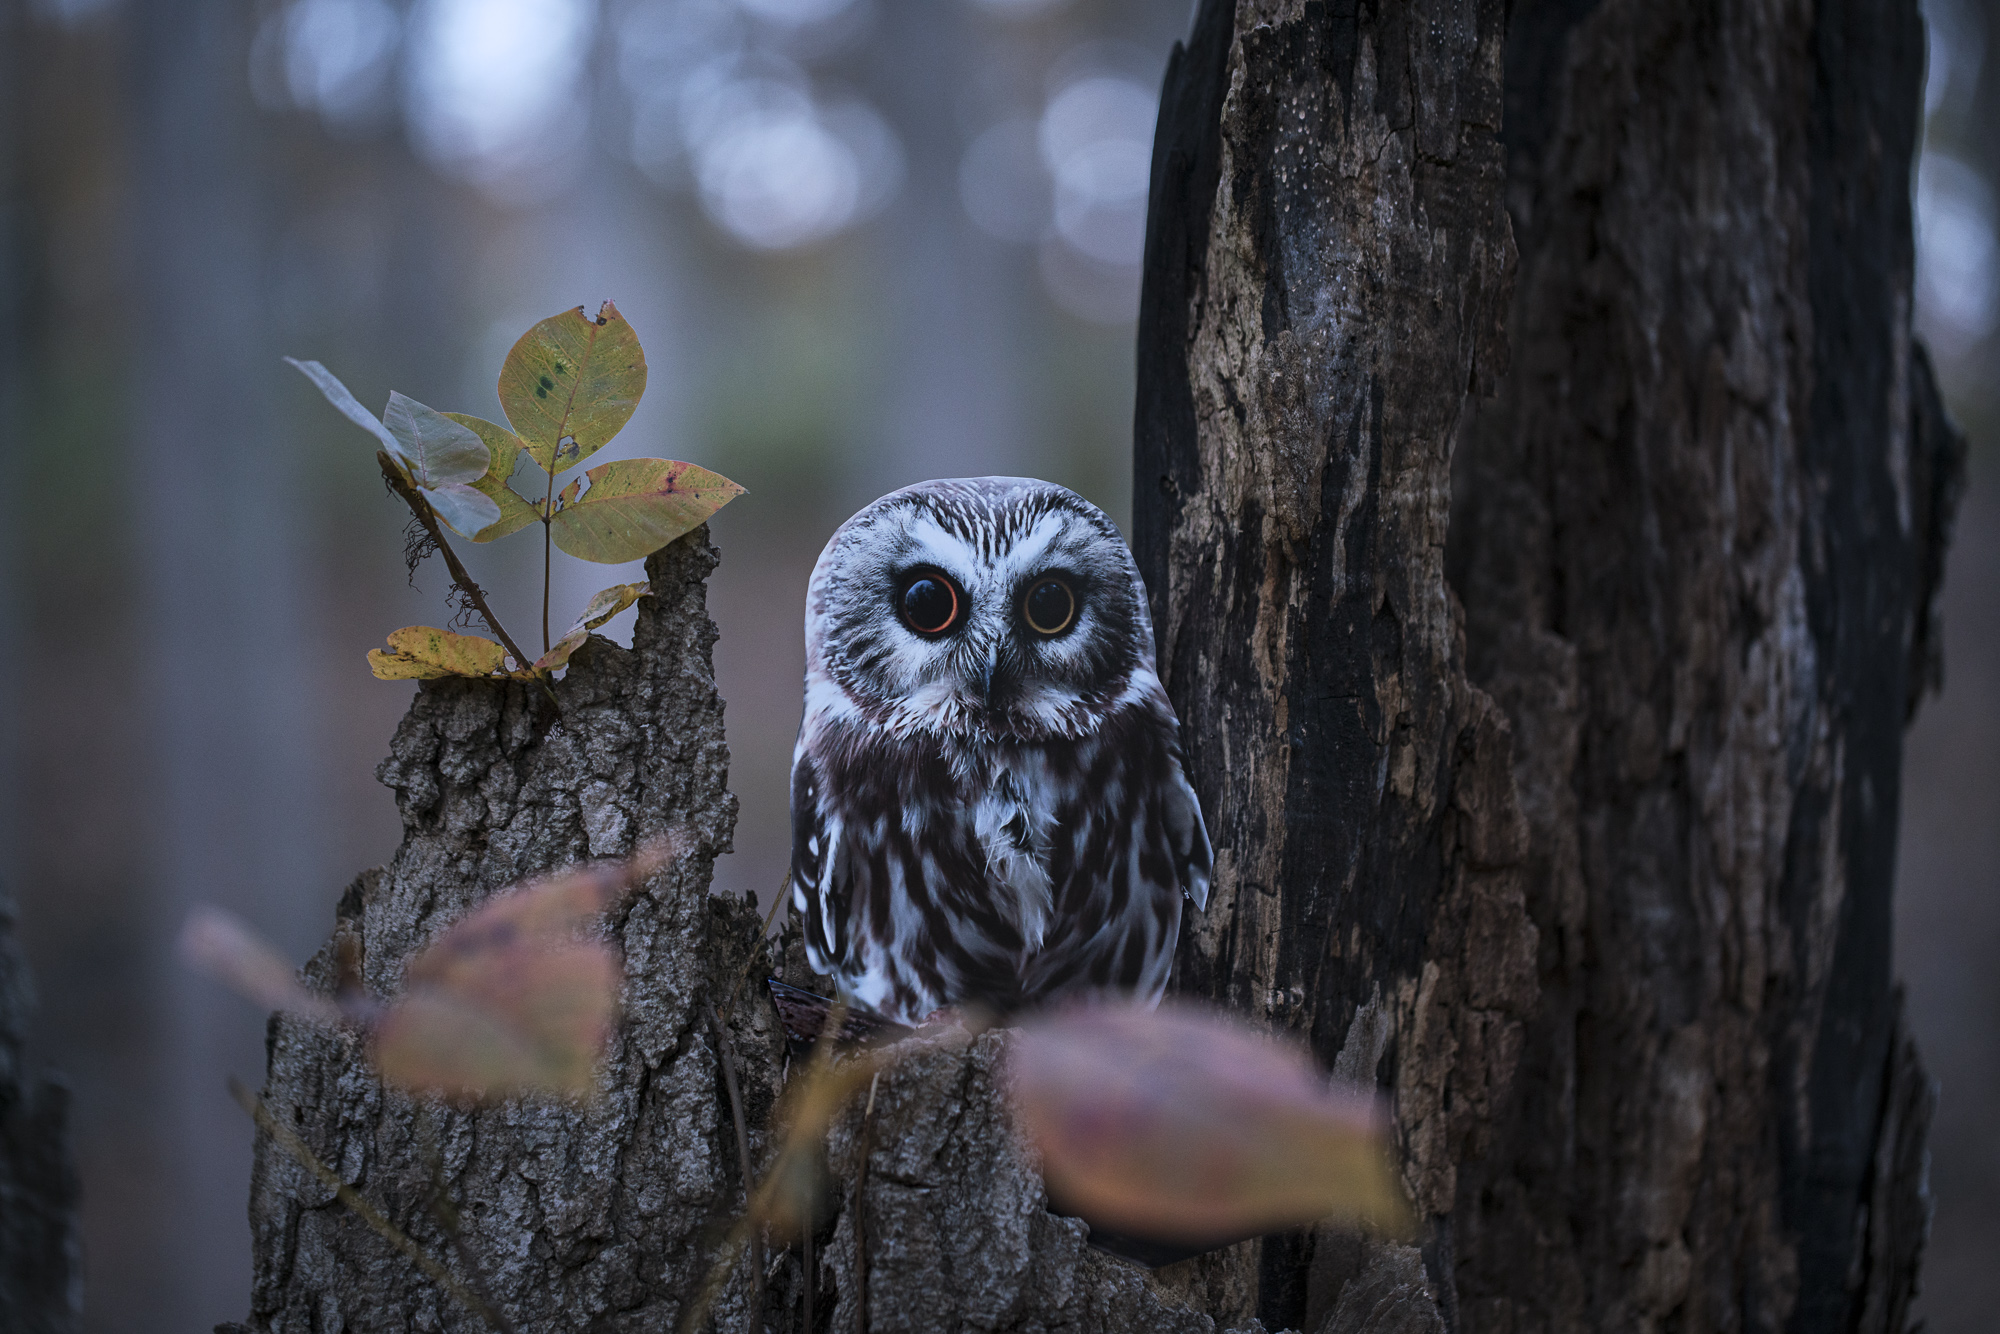 A photograph of a paper cutout of a photo of a Northern Saw-whet Owl placed on a broken tree trunk that still has a few autumn leaves. There is a trunk of another tree extending through the image on the right. The image has an overall cool blue tone indicating it was taken at twilight.